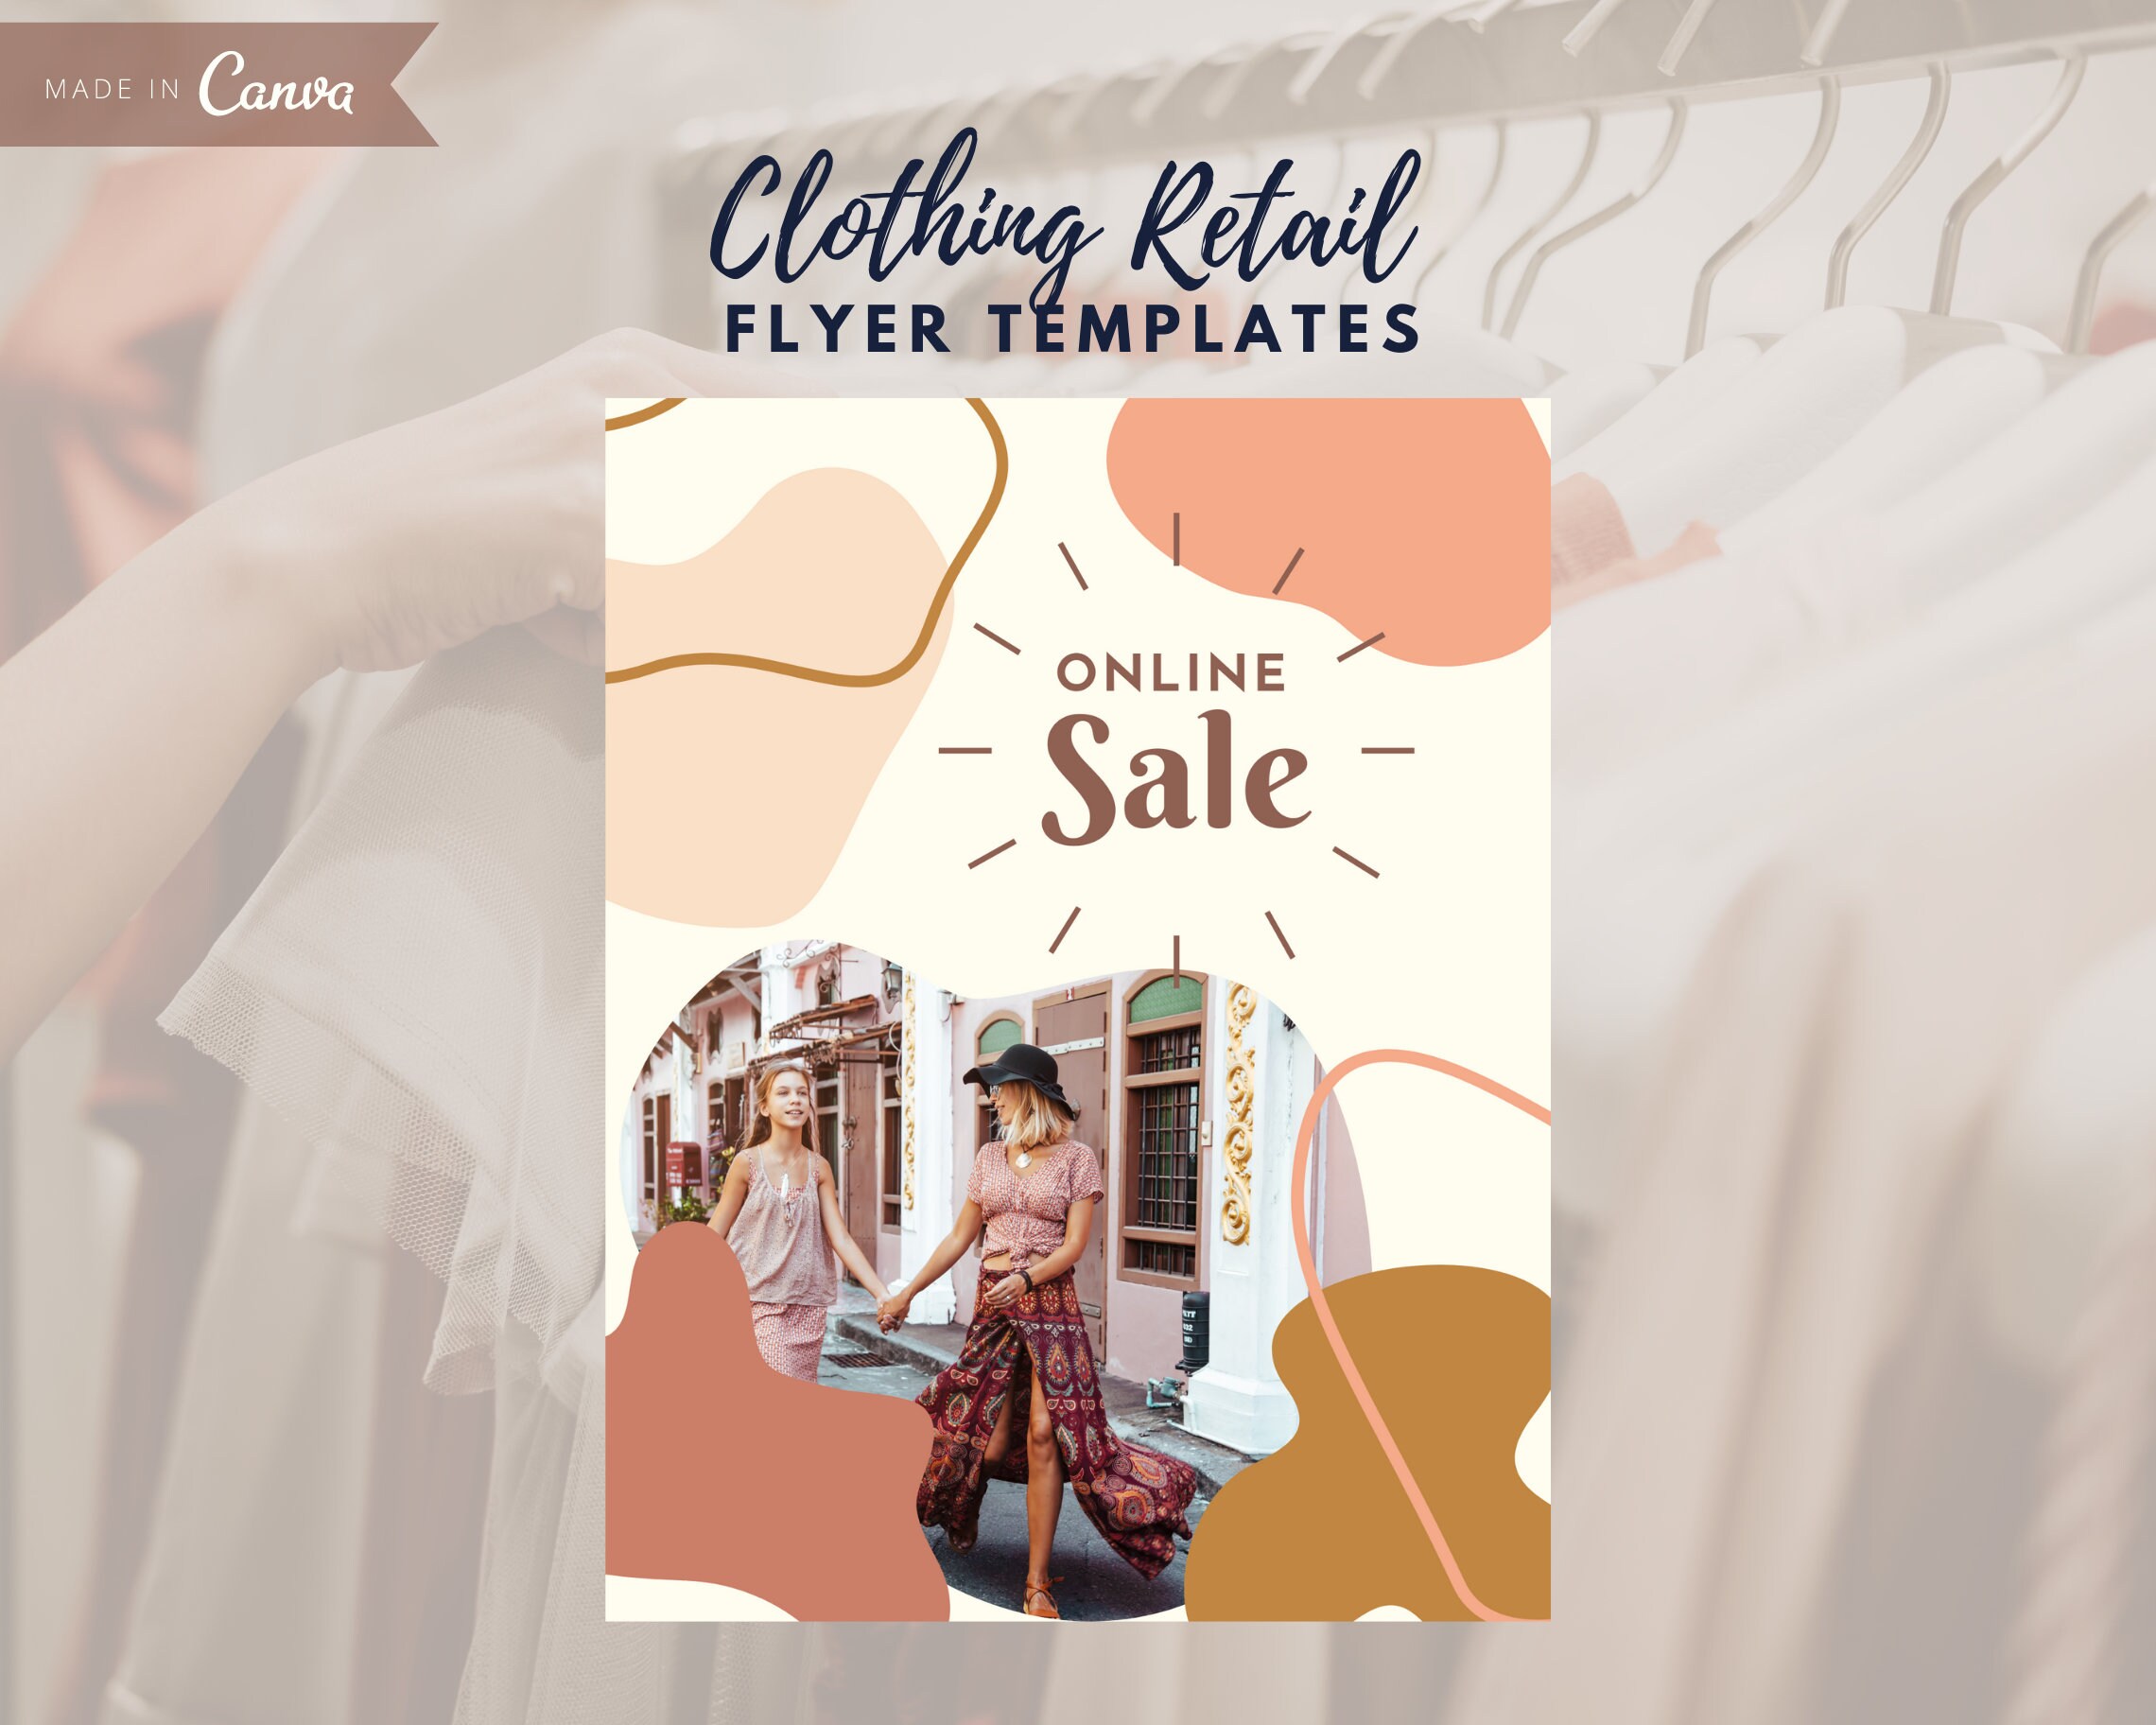 5 Clothing Retail Flyer Template Canva Templates Boutique 